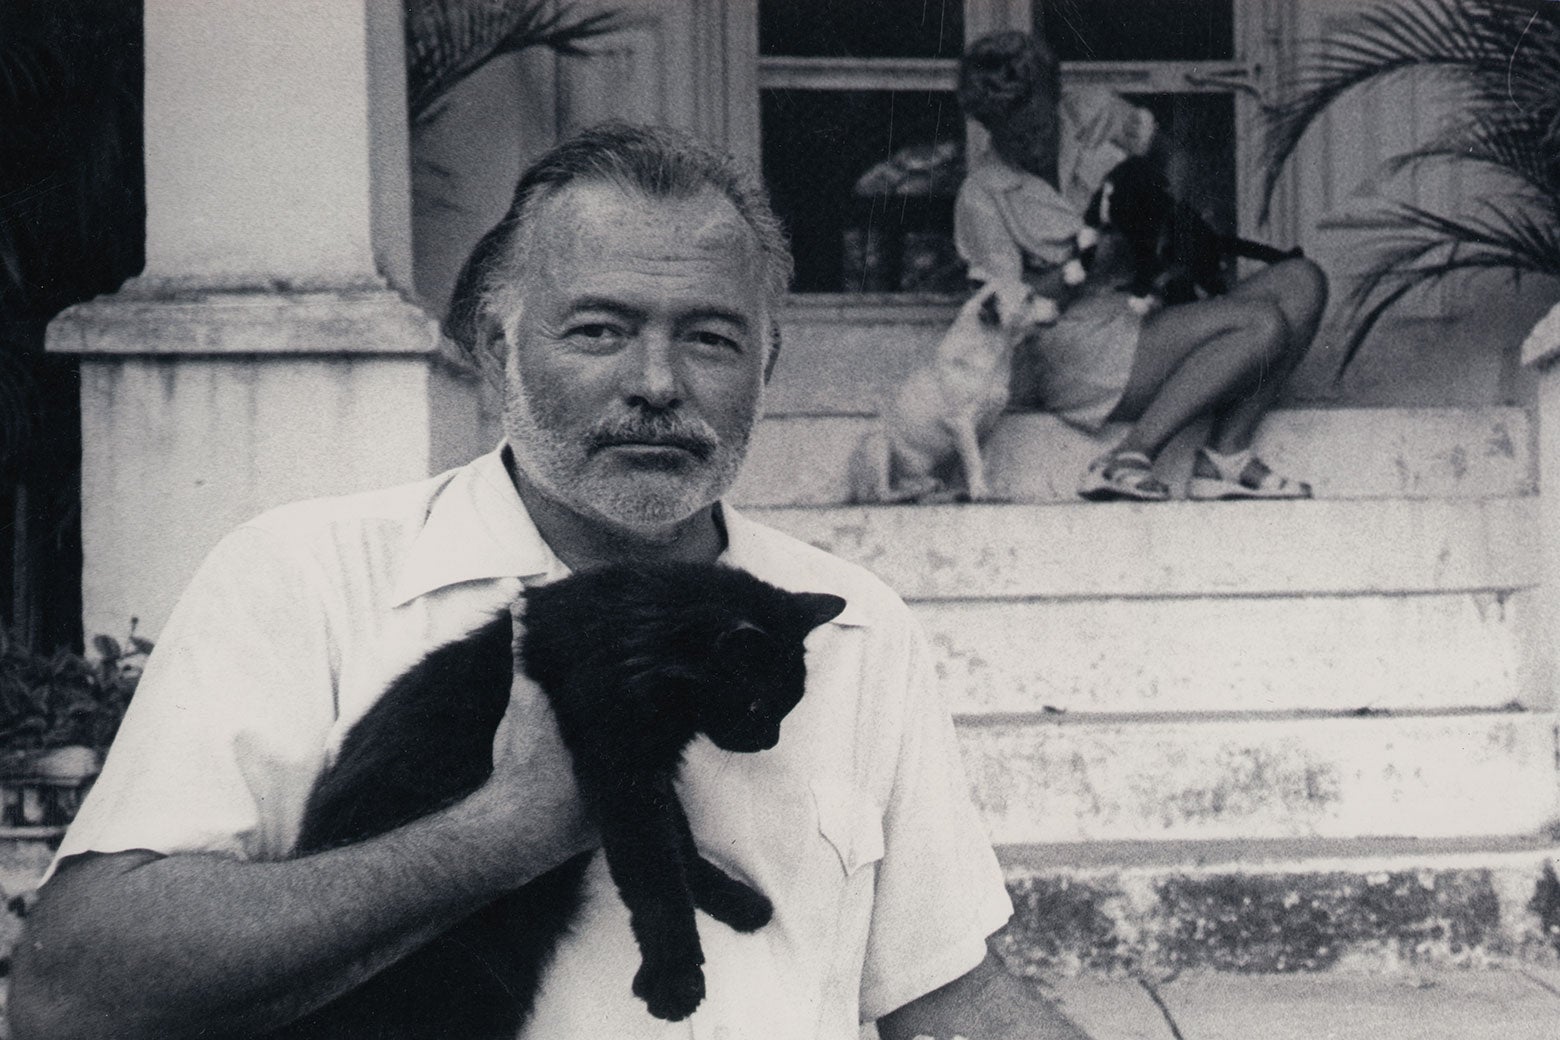 Hemingway holds a cat while standing in front of a porch. A woman and a dog can be seen sitting on the steps behind him.